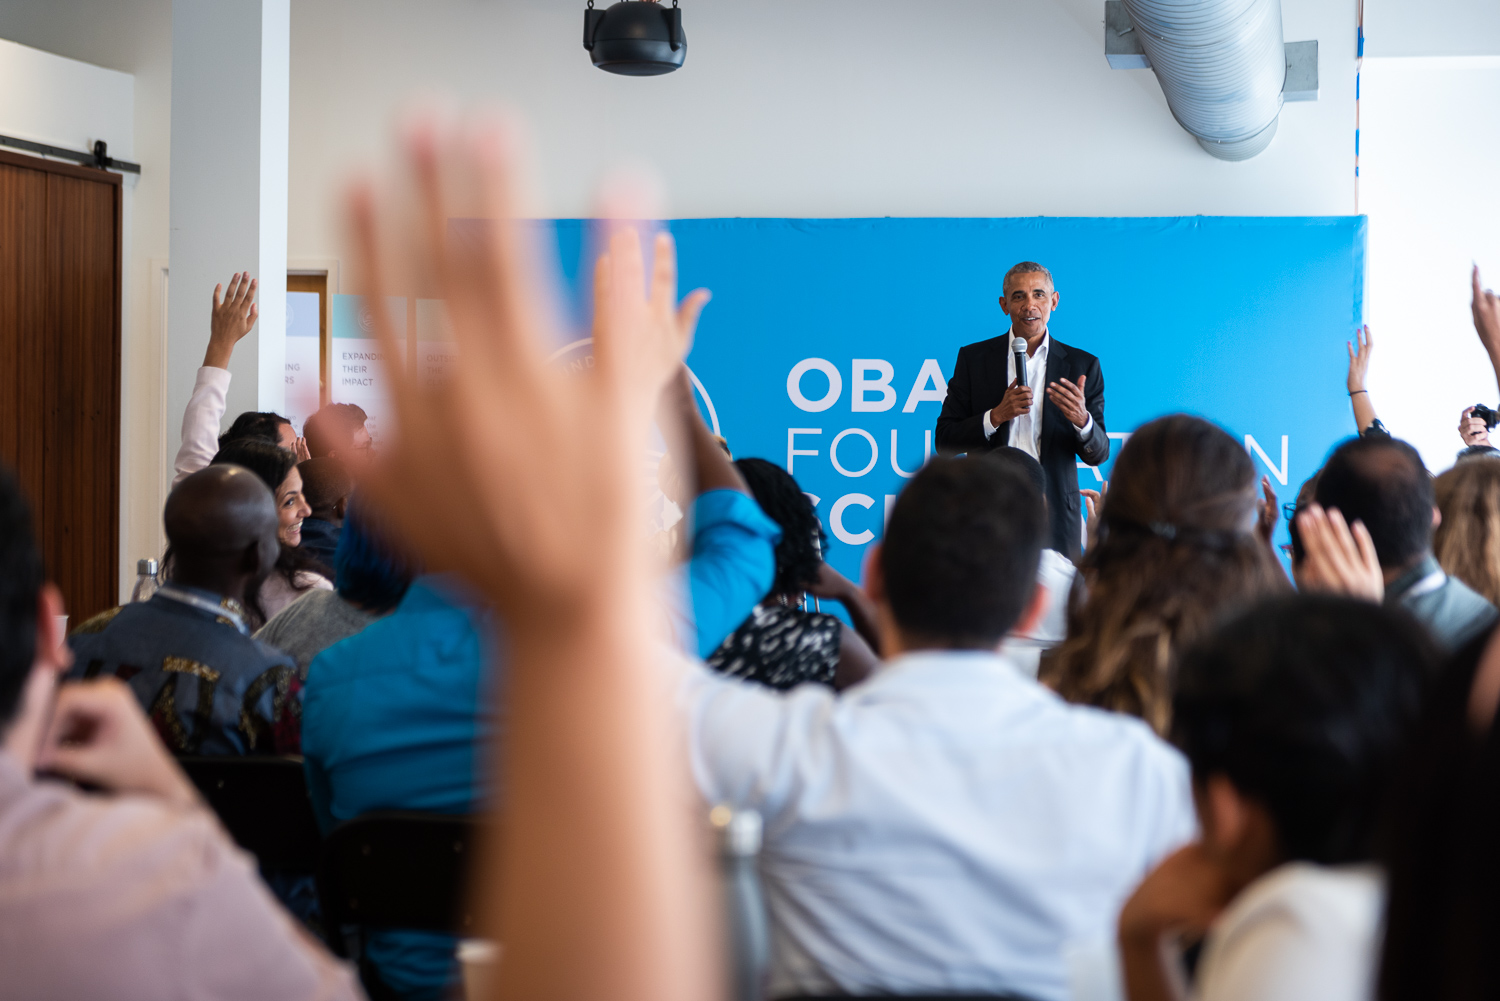 This picture shows President Obama wearing a black suit and a white shirt
while standing in front of the Foundations logo, giving a presentation to various 
skin-toned people.